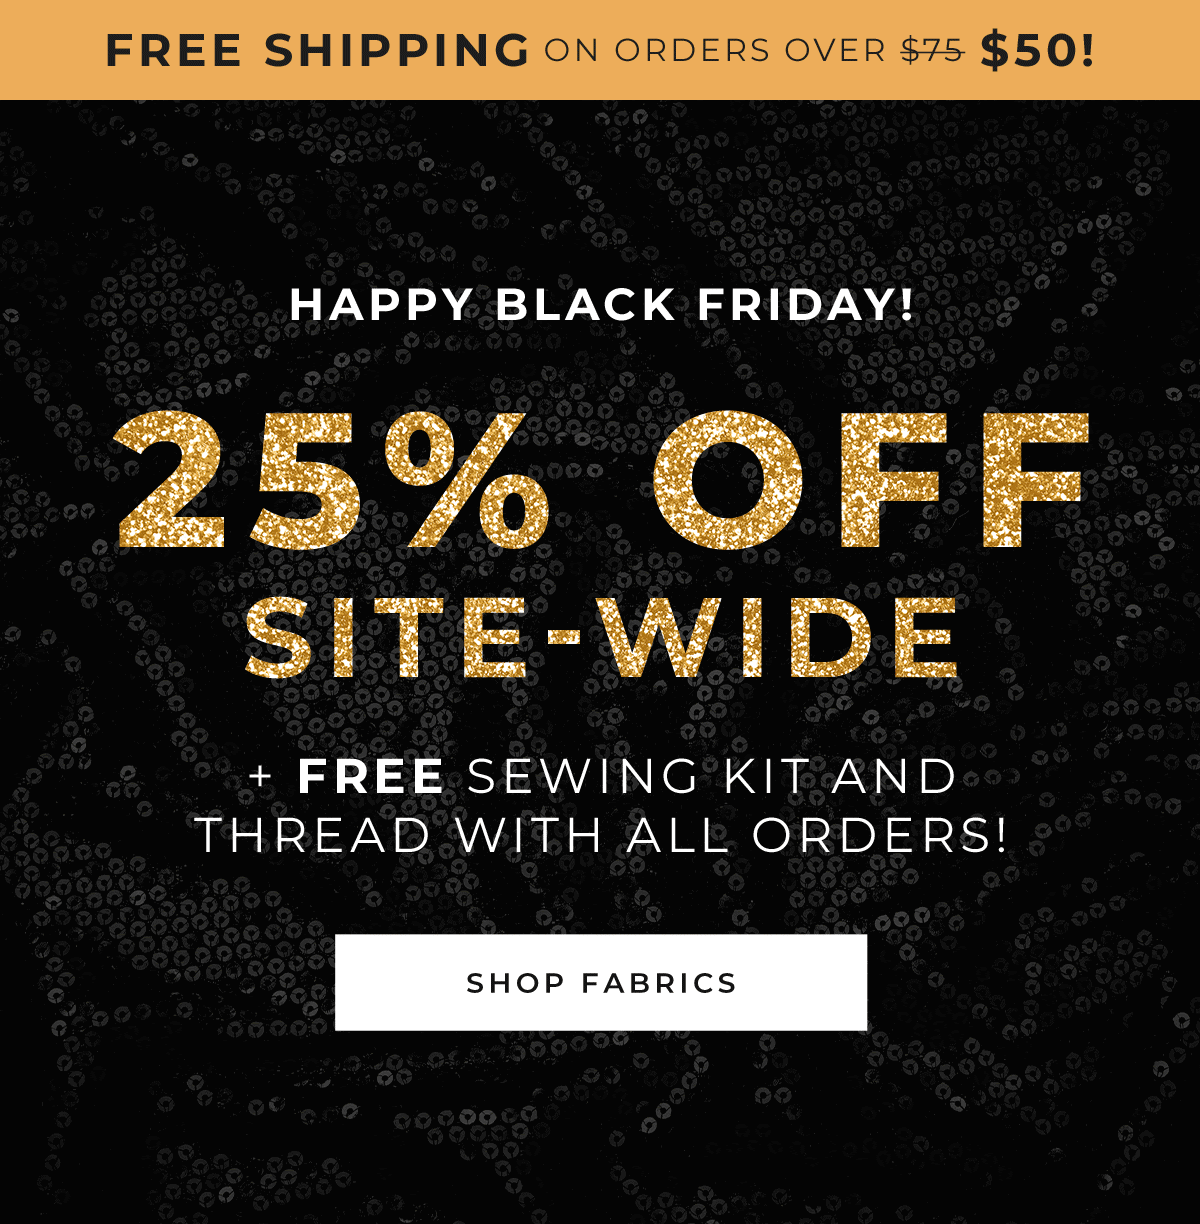 Free shipping on orders over $50! Happy Black Friday 25% Off Site-wide + free sewing kit and thread with all orders! | Shop Fabrics